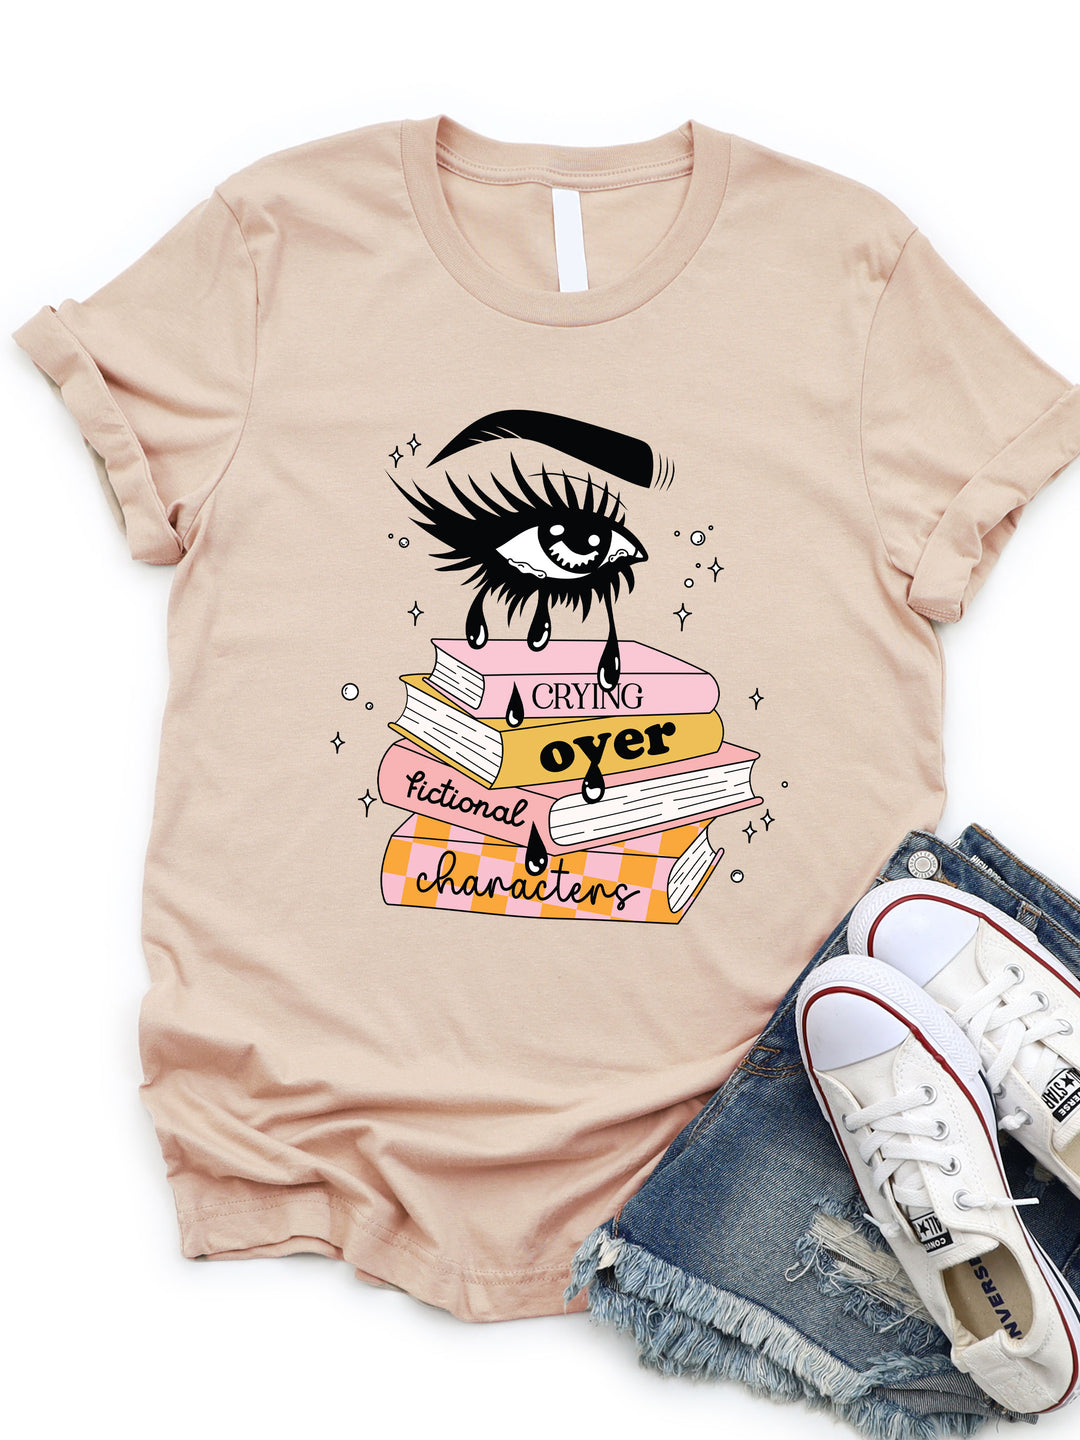 Crying Over Fictional Characters - Graphic Tee